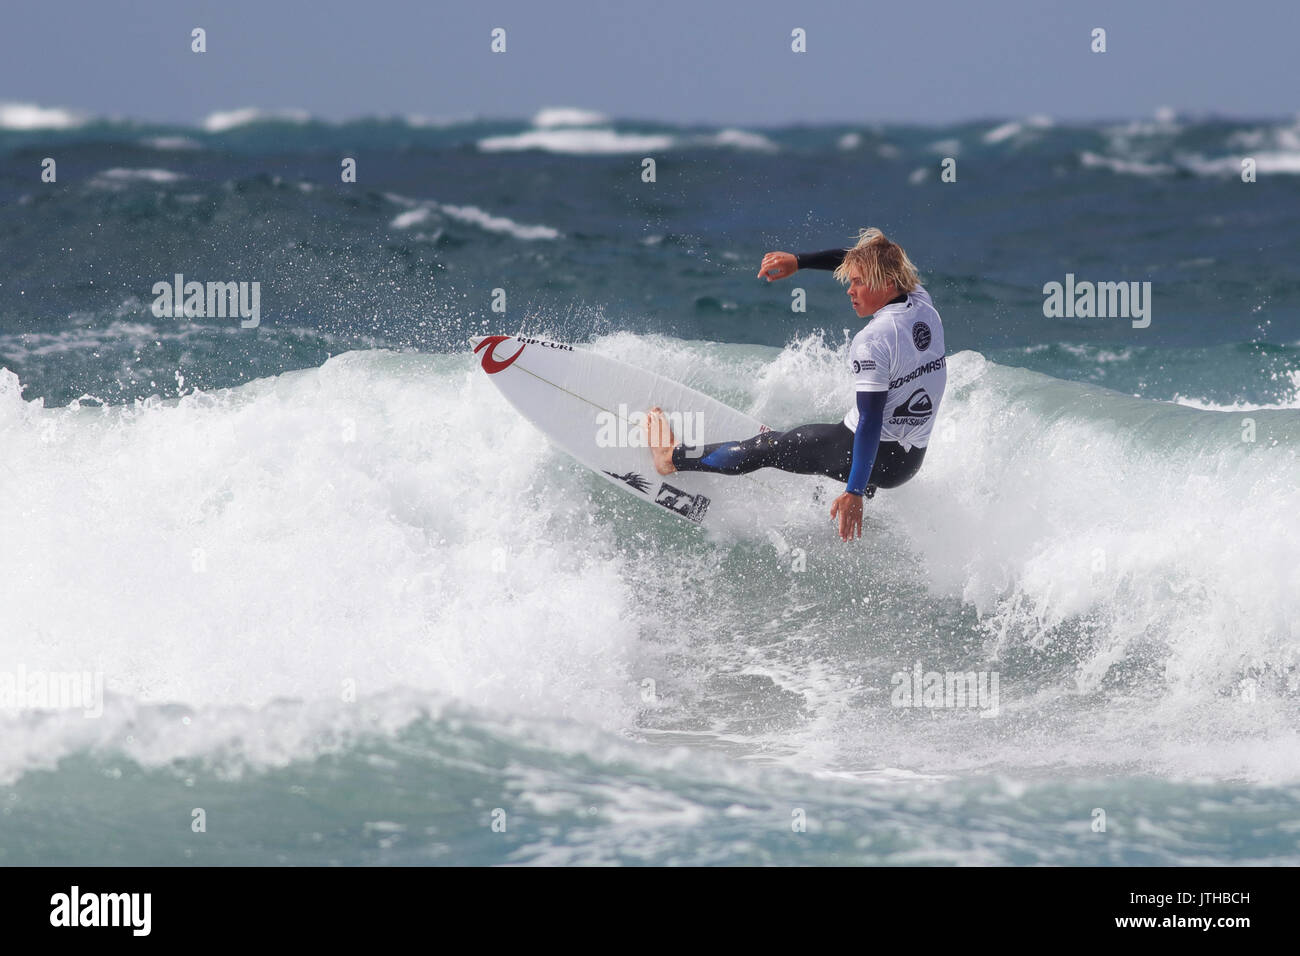 Fistral Beach, Newquay, Cornwall, UK. 9th Aug, 2017. Surfer Harry Roth takes part in Day 1 of the Boardmasters Championship in the open division. Rough seas made conditions challenging. Stock Photo